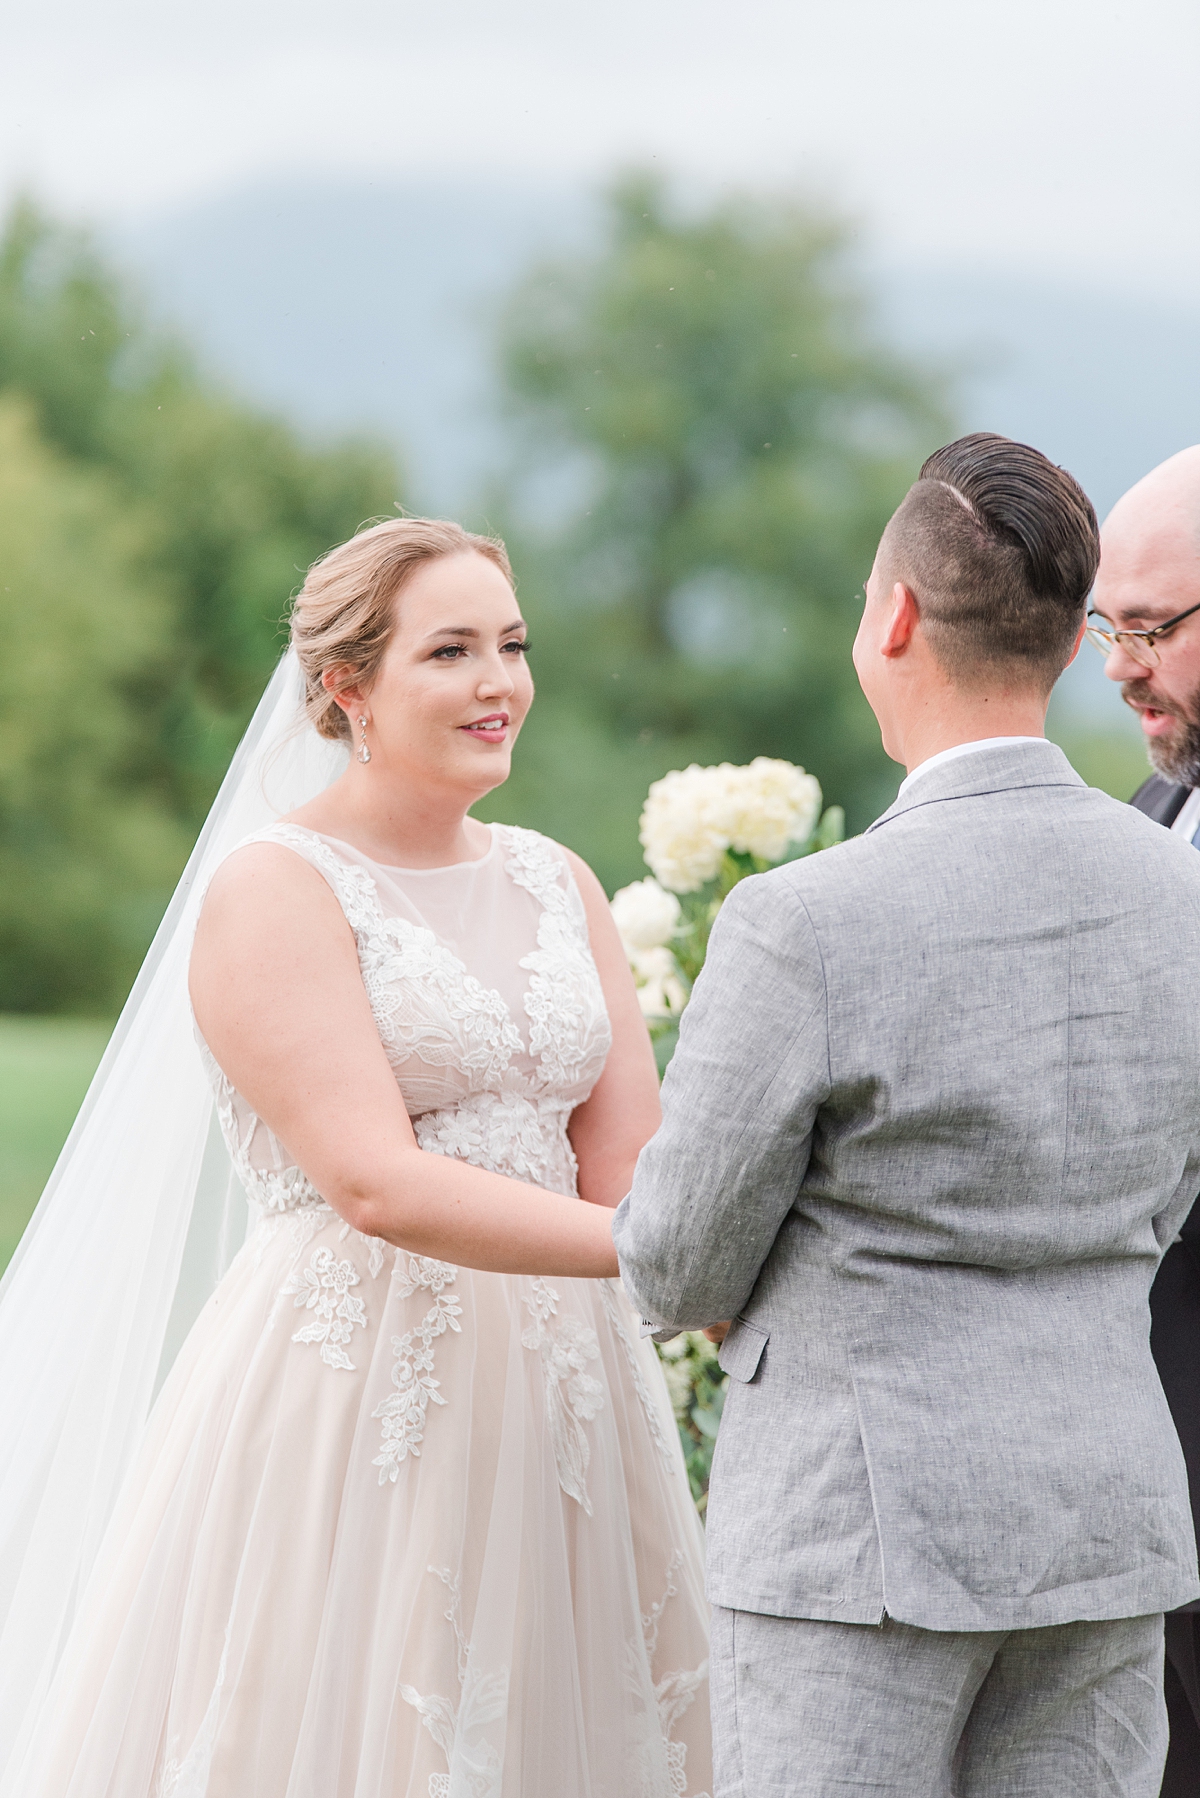 Ceremony with Mountain View at a Timeless Grace Estate Winery Wedding. Wedding Photography by Virginia Wedding Photographer Kailey Brianne Photography.